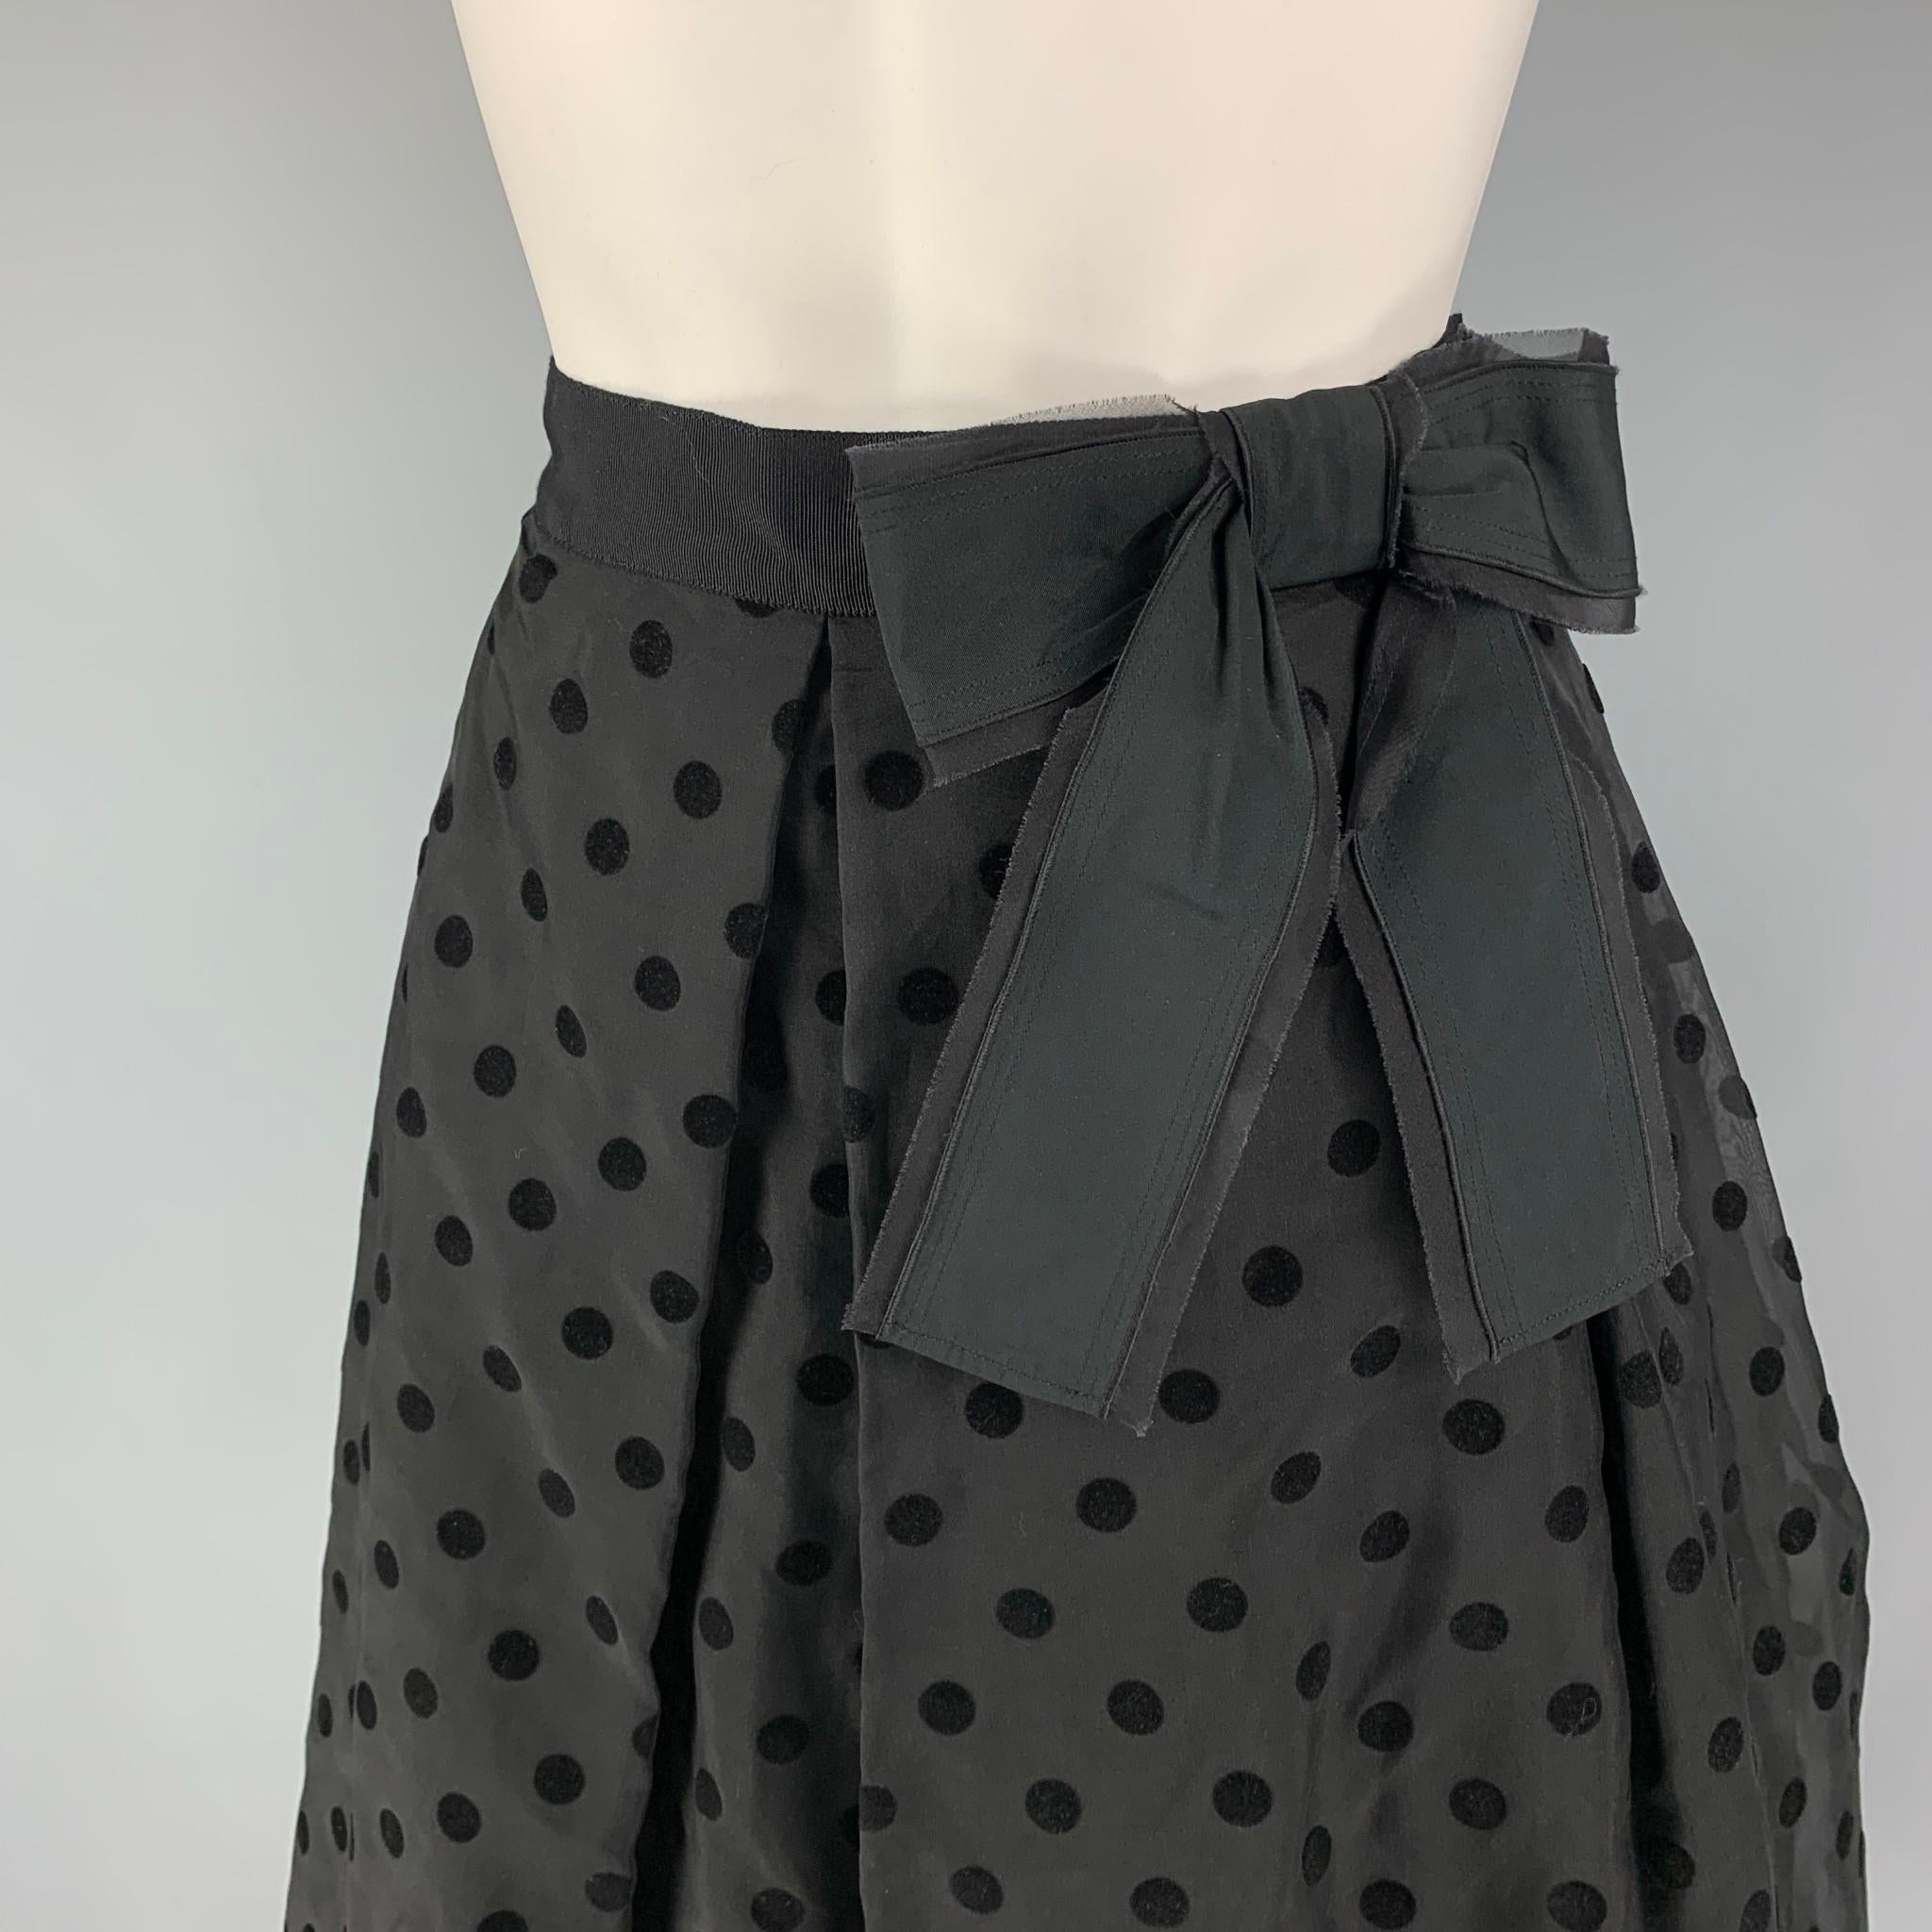 MARC JACOBS skirt comes in a black polyester with a slip liner featuring a overlay design, polka dot details, front bow design, and a sie zipper closure. 

New with tags. 
Marked: 8

Measurements:

Waist: 30 in.
Hip: 42 in.
Length: 25 in.